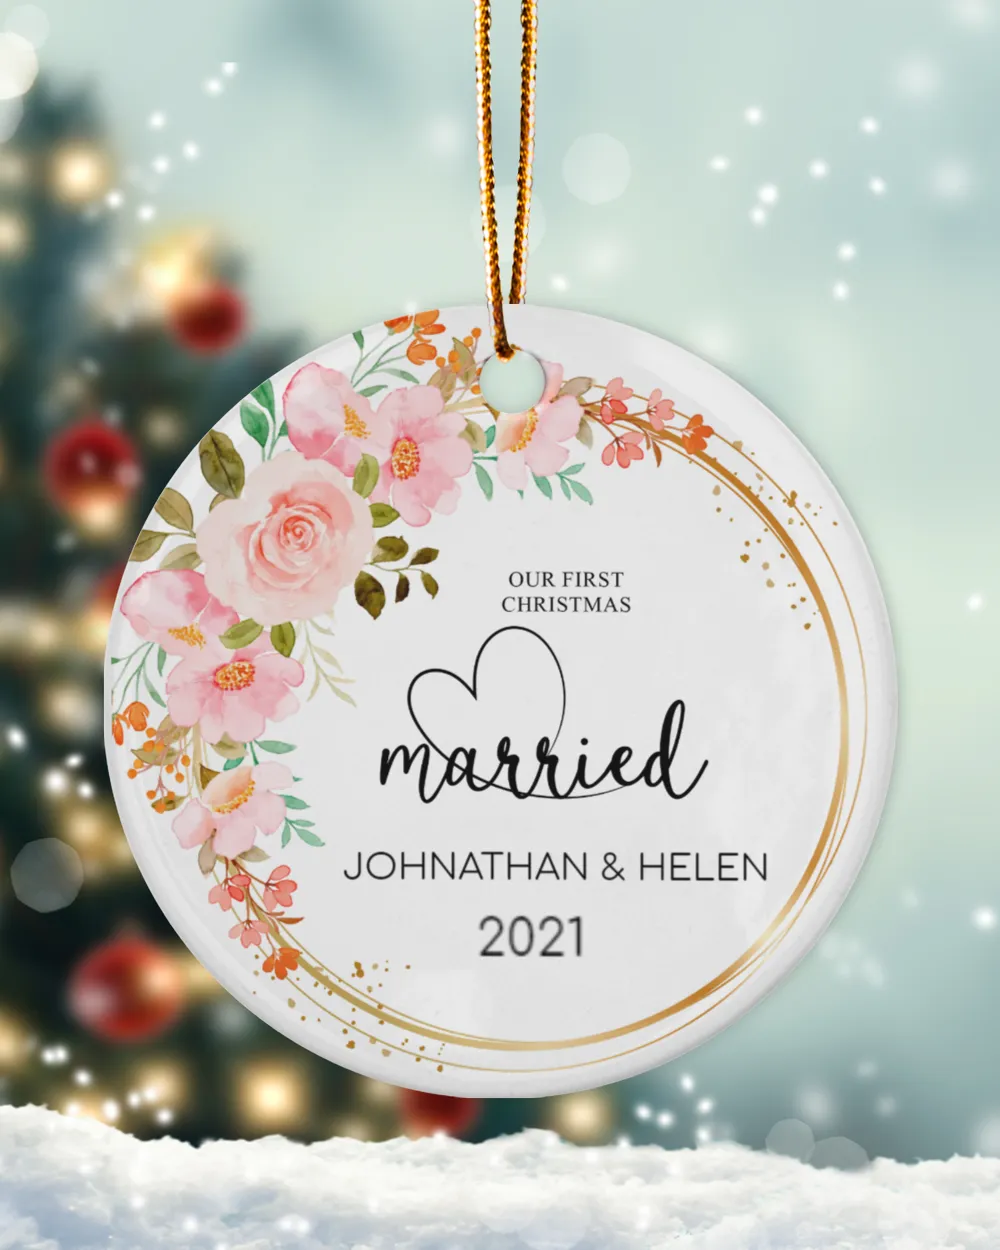 First Christmas Married Ornament , Married Christmas Ornament , Our First Christmas Married Ornament - Personalized Ornament